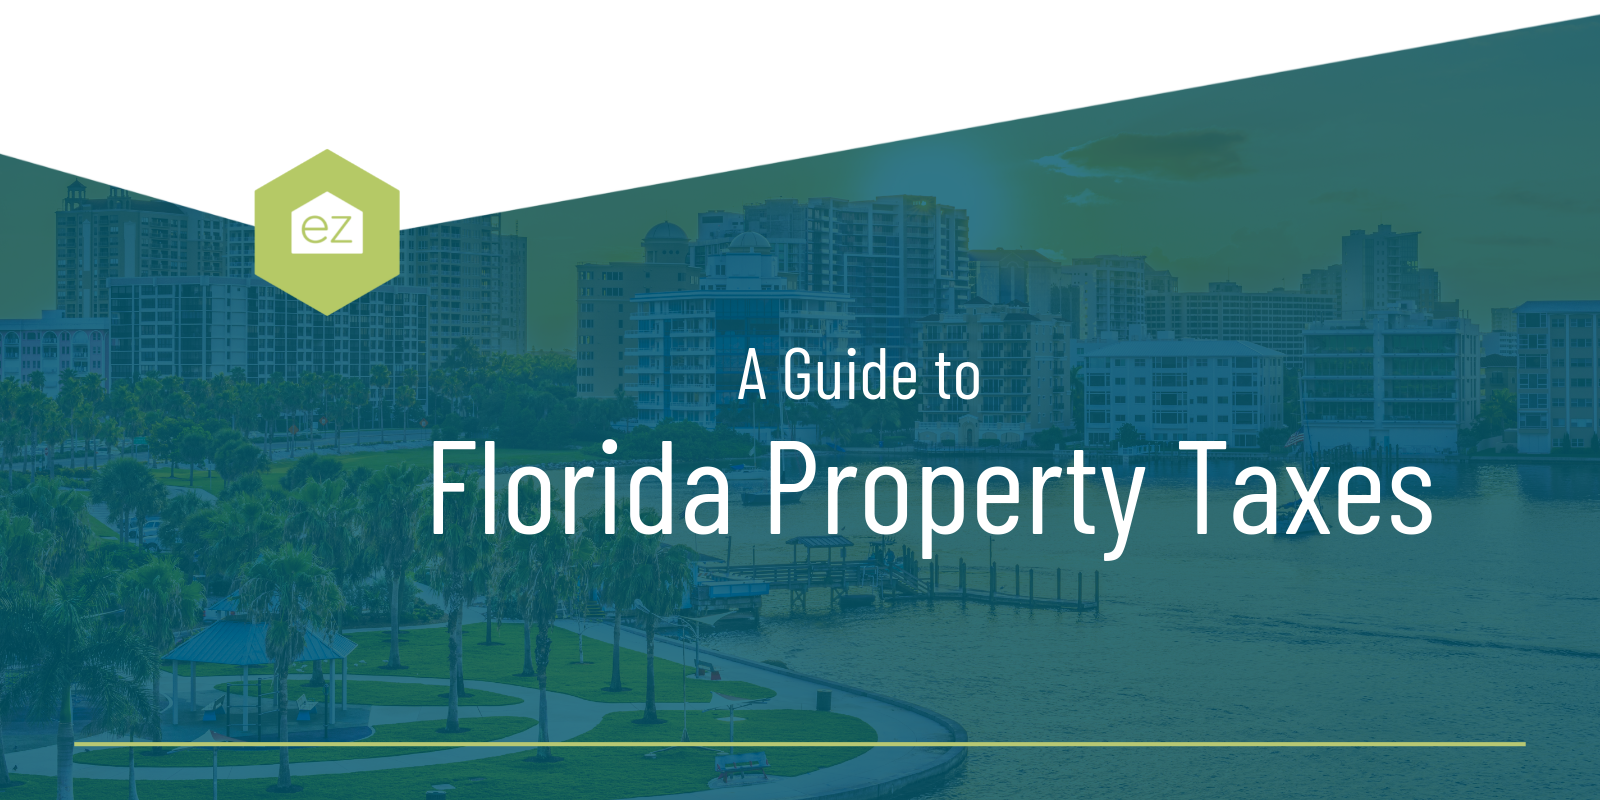 a-guide-to-florida-property-taxes-everything-you-need-to-know